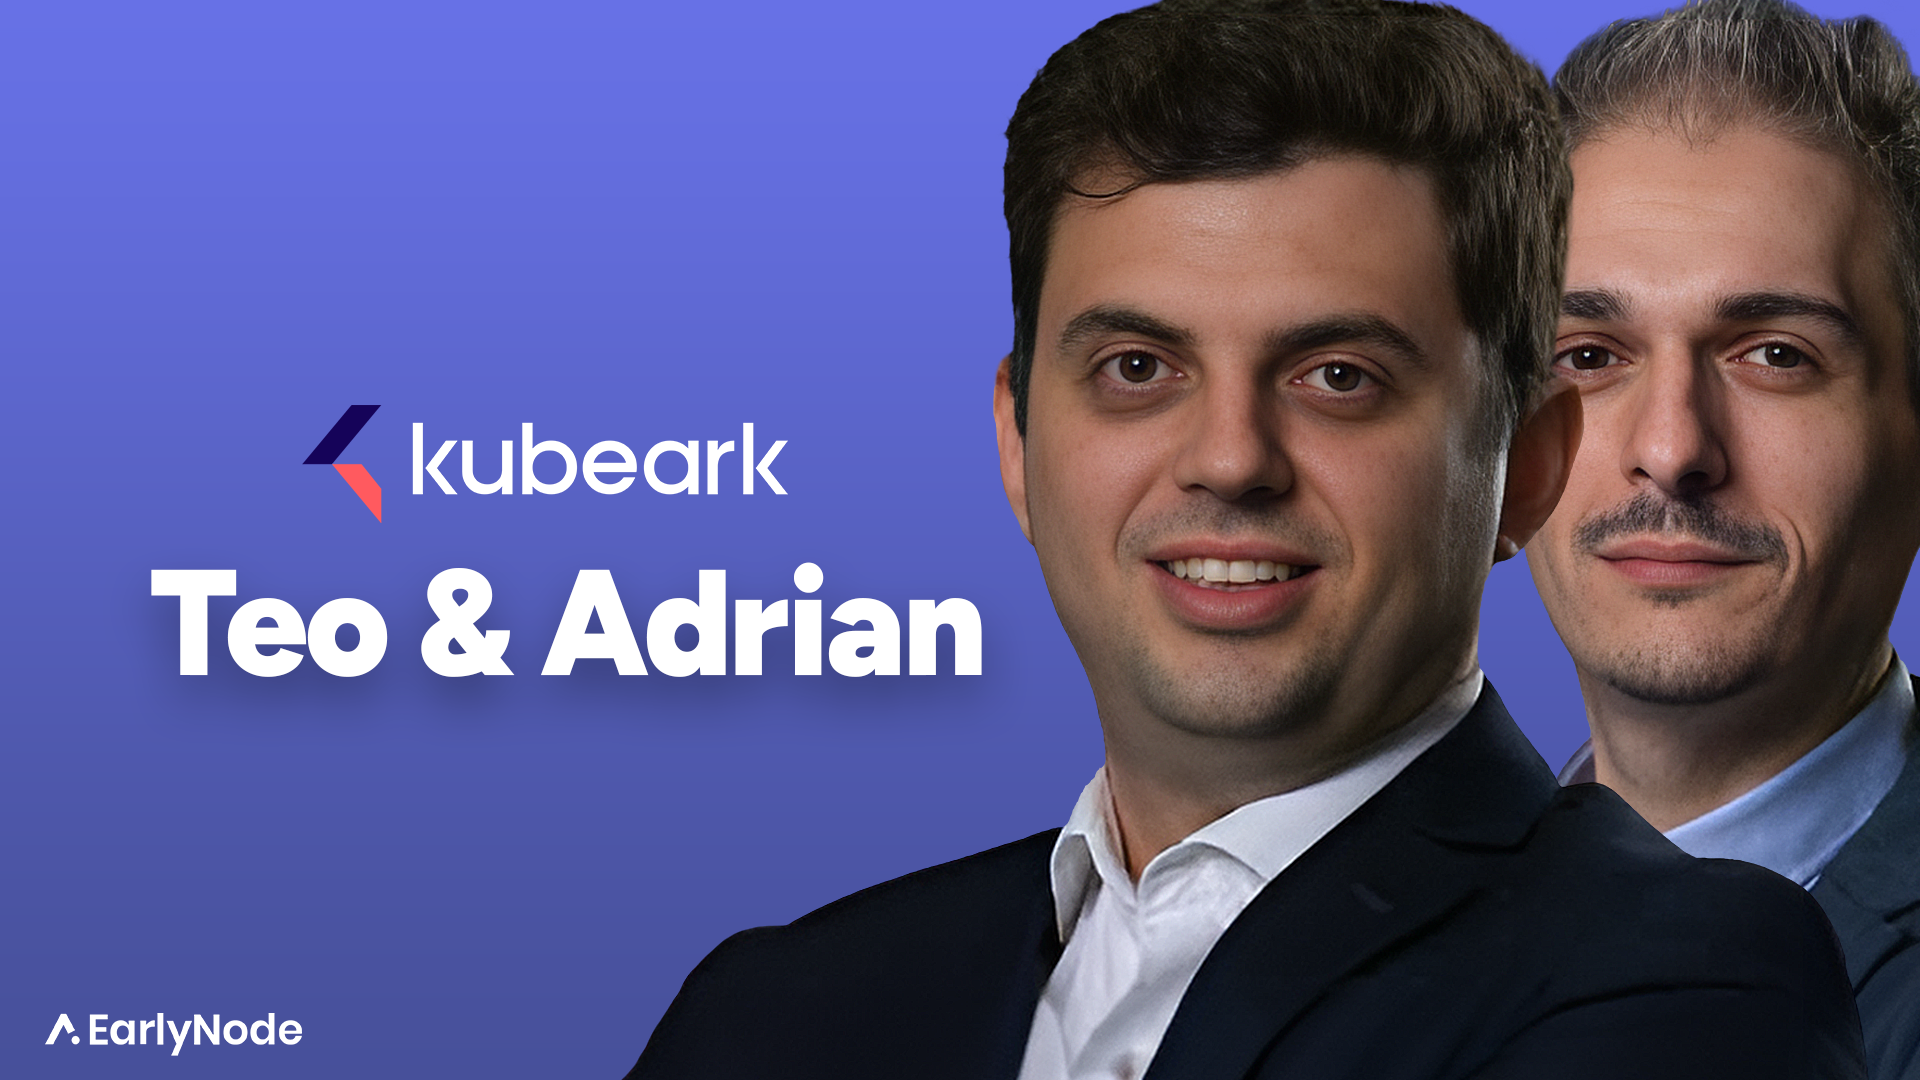 6 Founders and One Vision: The Story of Kubeark, with Teo and Adrian